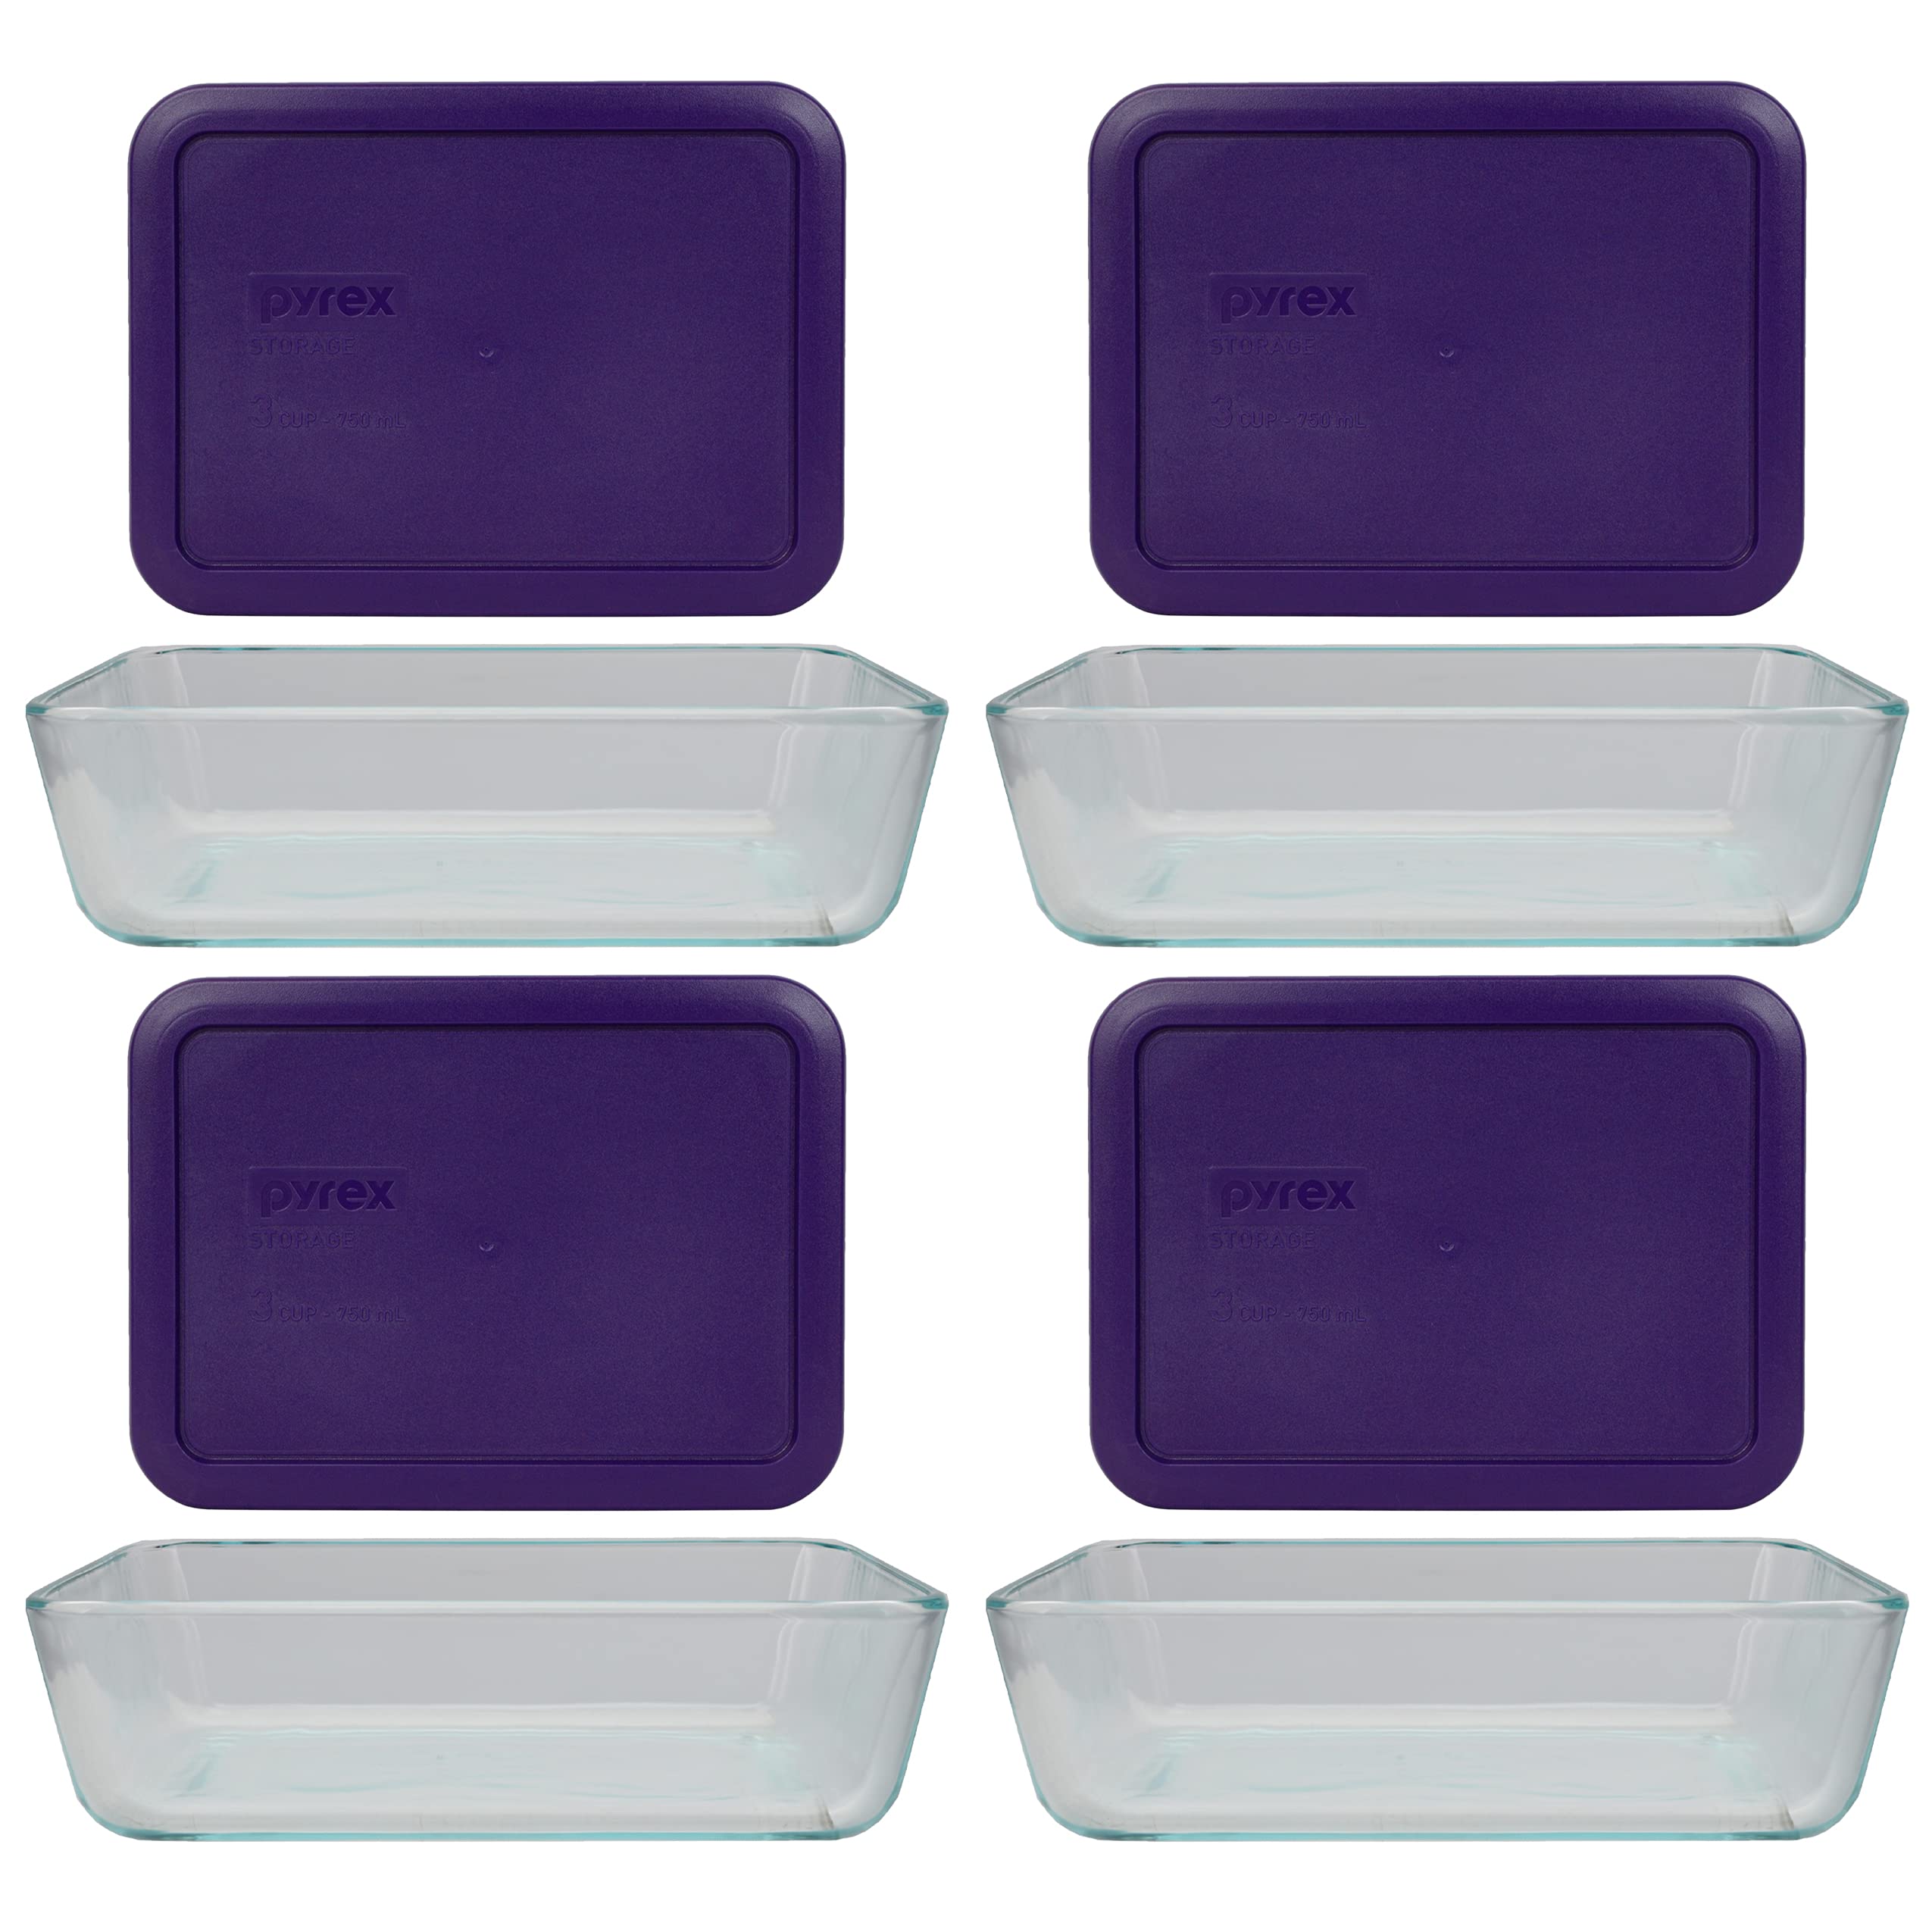 Pyrex (4 7210 Glass Dishes & (4) 7210-PC Plum Purple Lids Made in the USA